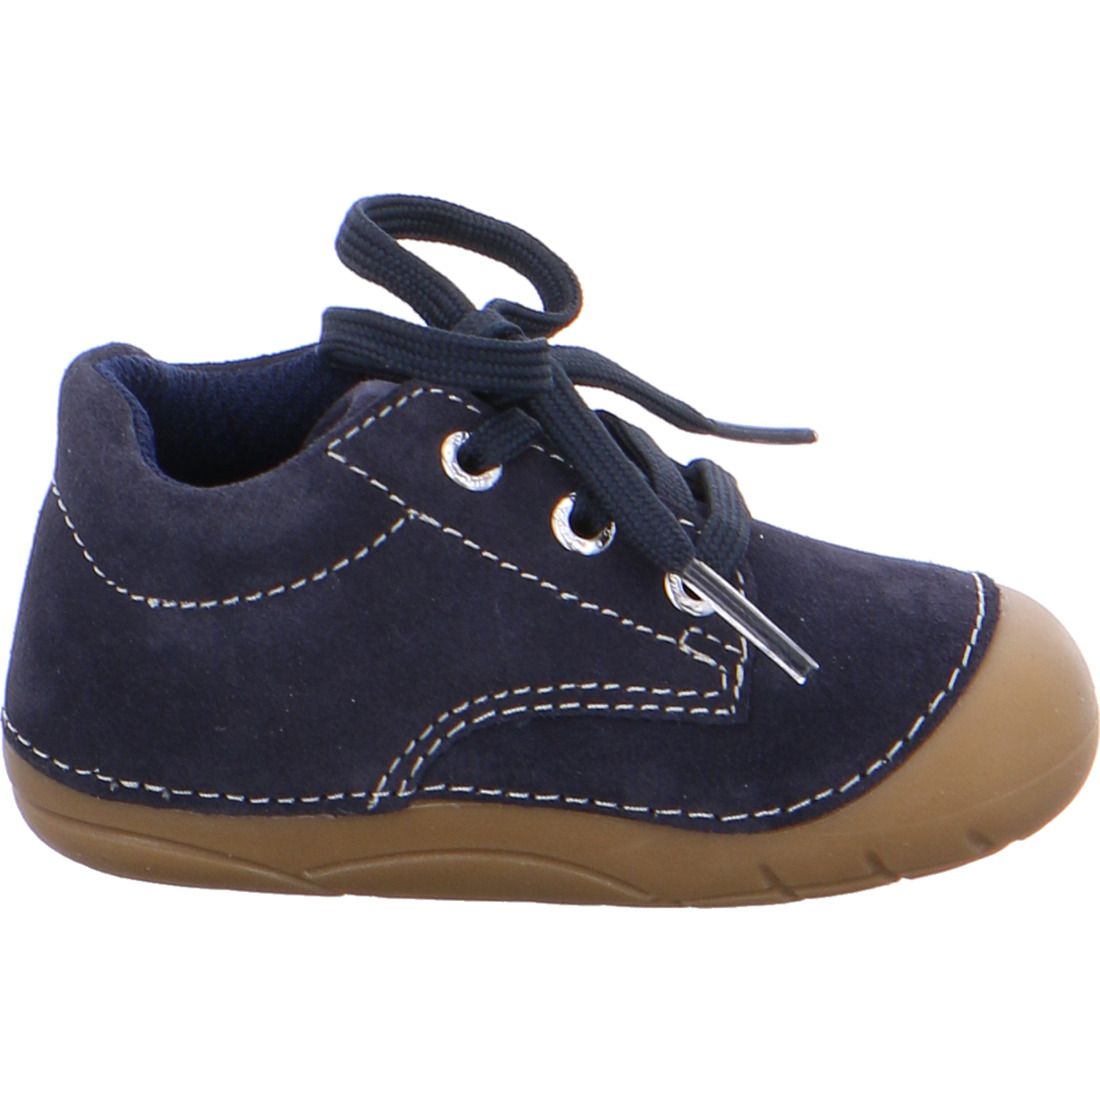 Barefoot Lurchi barefoot boty - Flo suede navy bosá